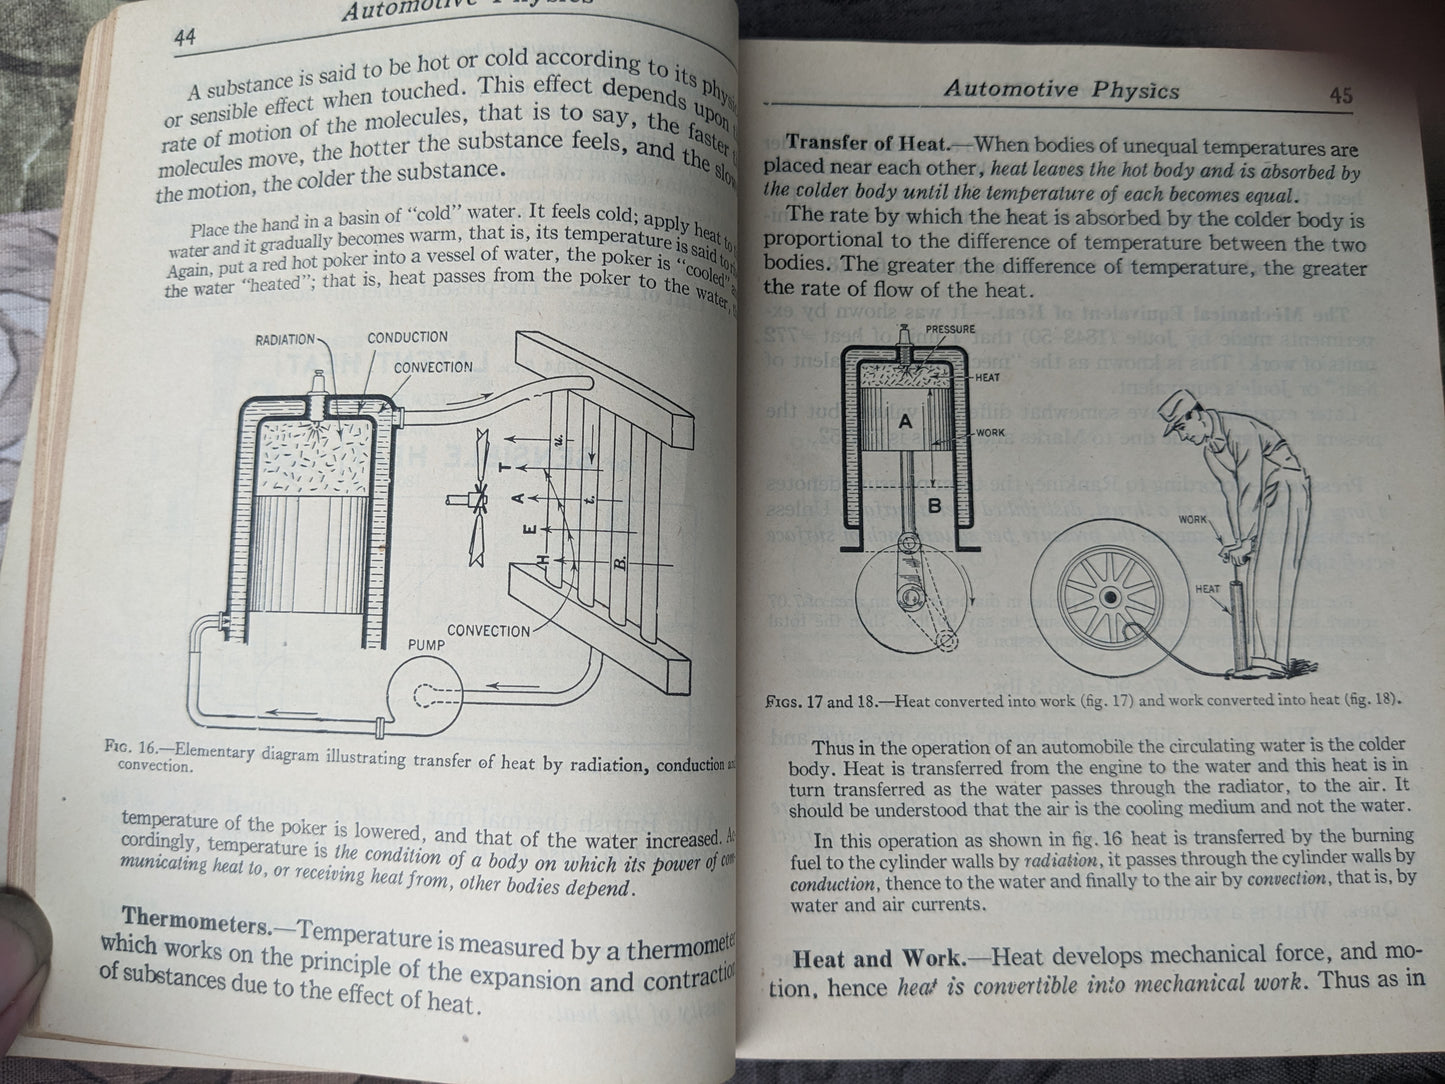 Audels New Automobile Guide for Mechanics, Operators and Servicemen by Frank Graham, 1946.